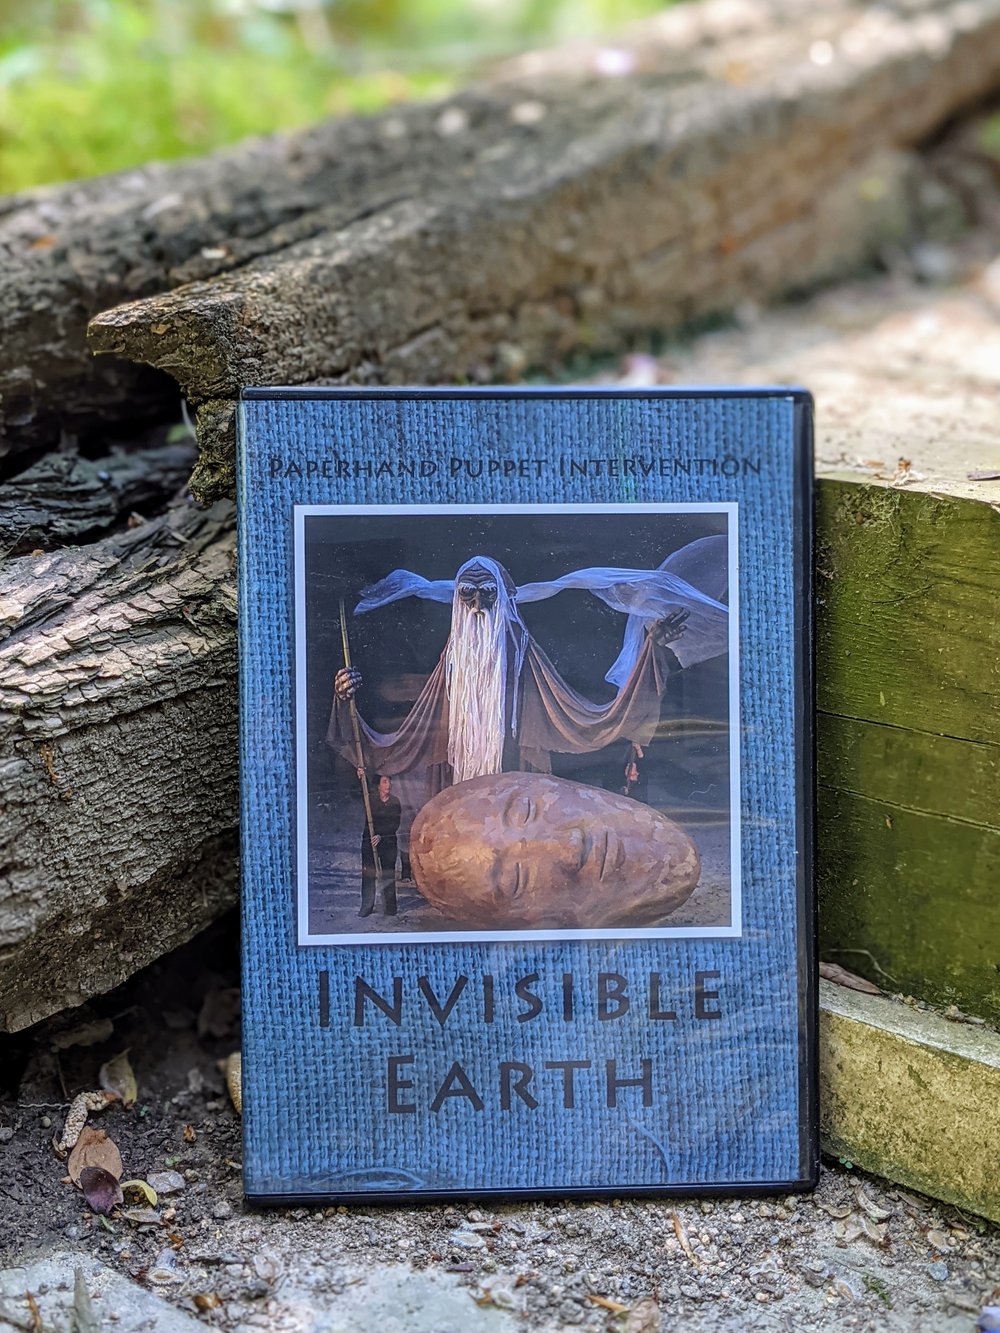 Image of Invisible Earth DVD